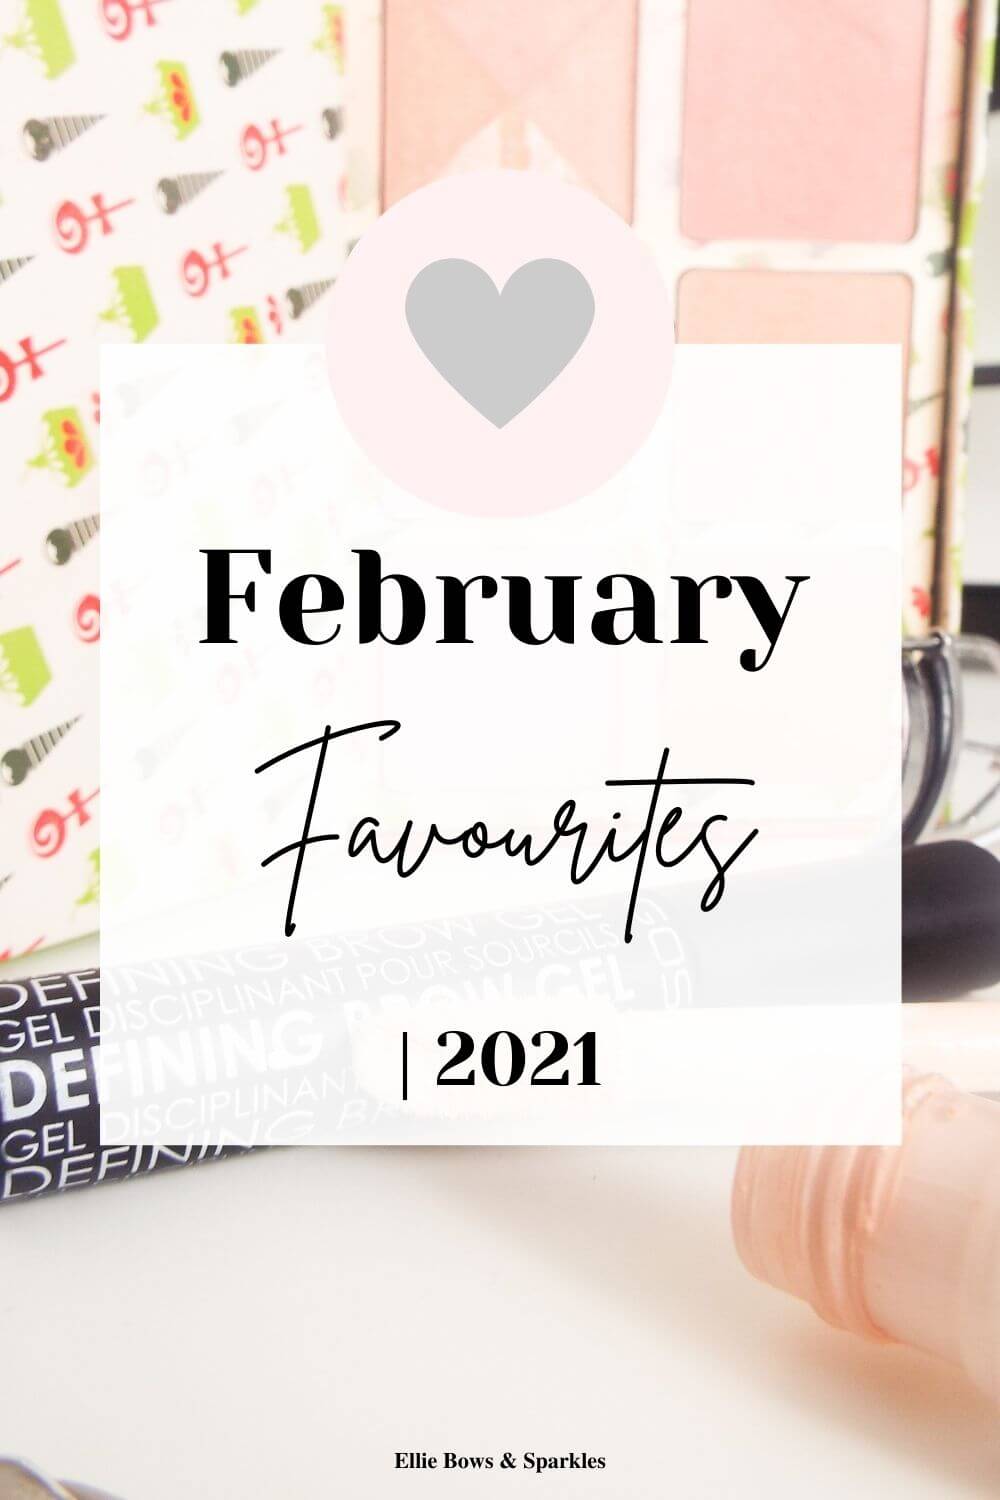 Pinterest pin, featuring large picture of Benefit blushers, Elf Concealer and GOSH eyebrow gel, with translucent white title card. February Favourites 2021 written in bold and handwritten font, with pink circle and heart above.